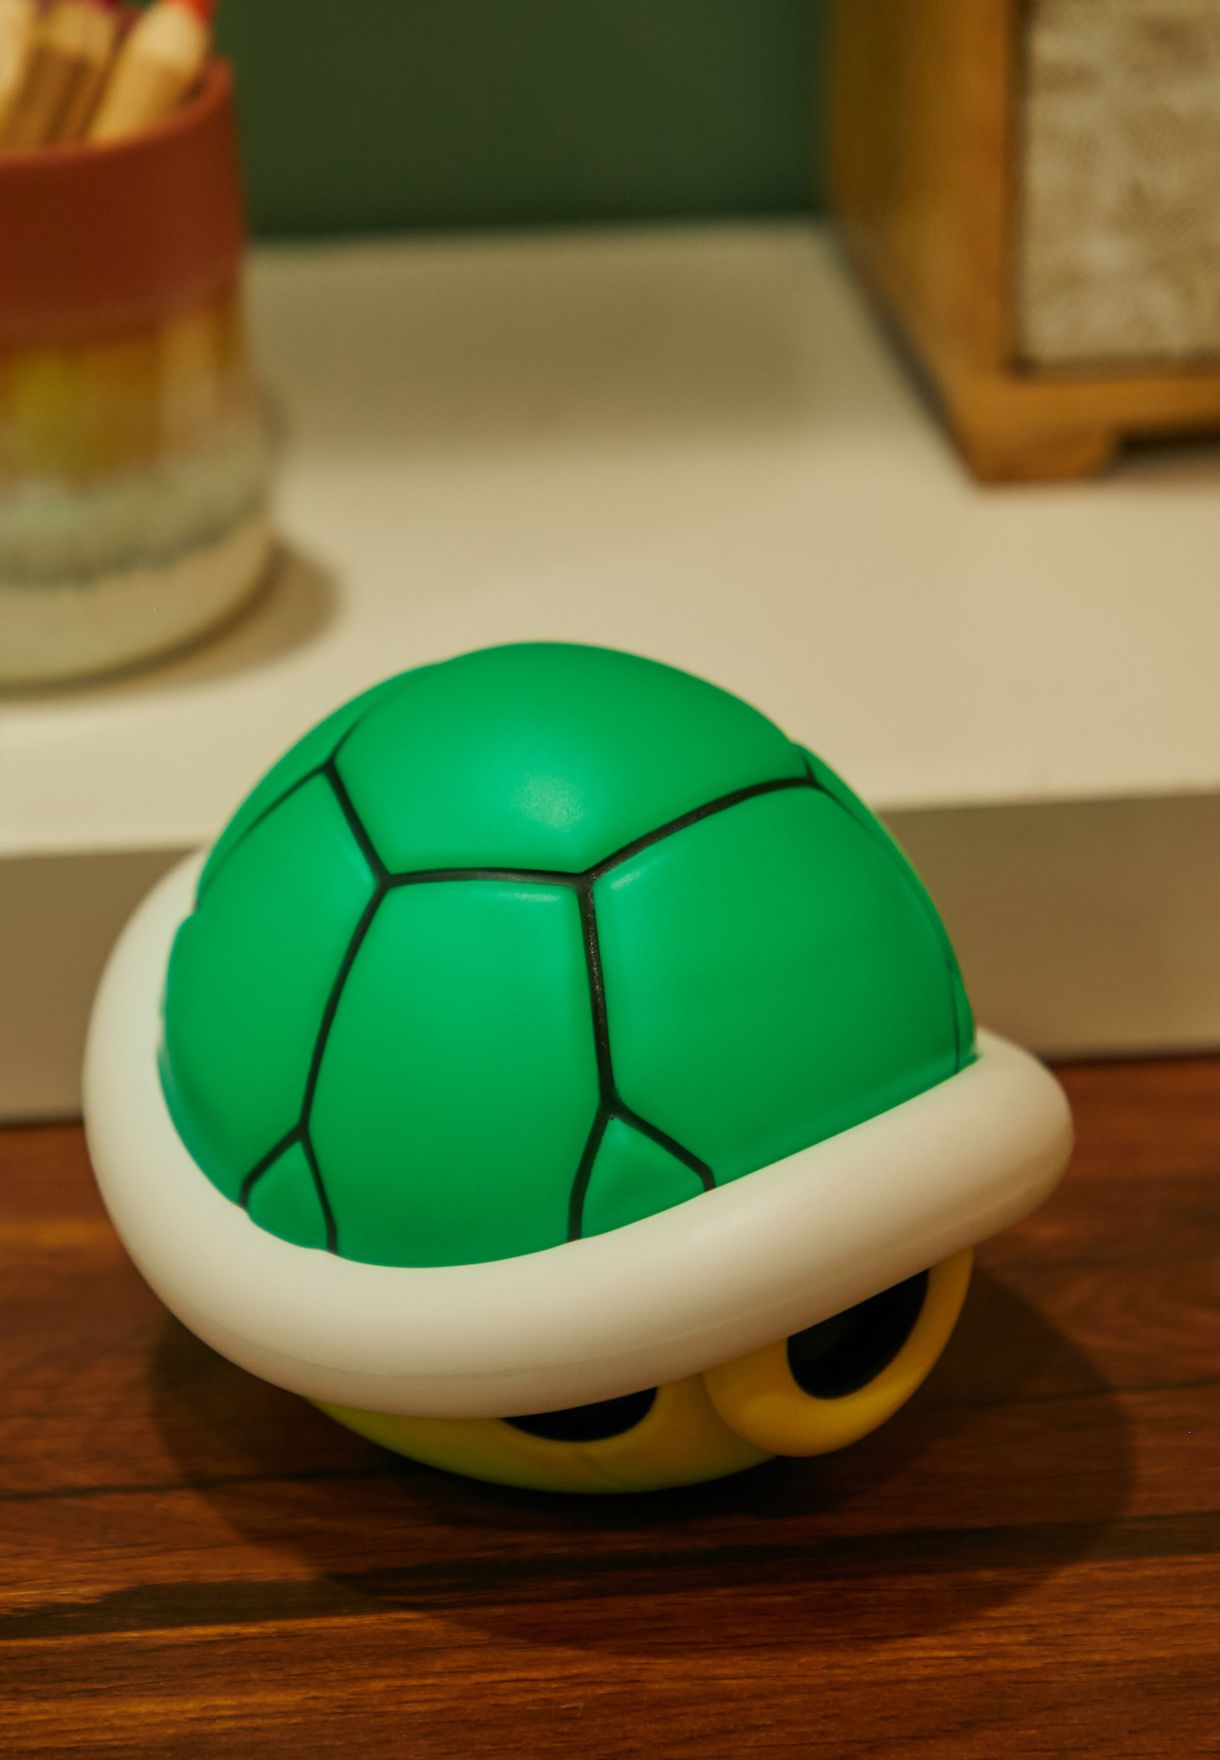 Super Mario Green Shell Light With Sound